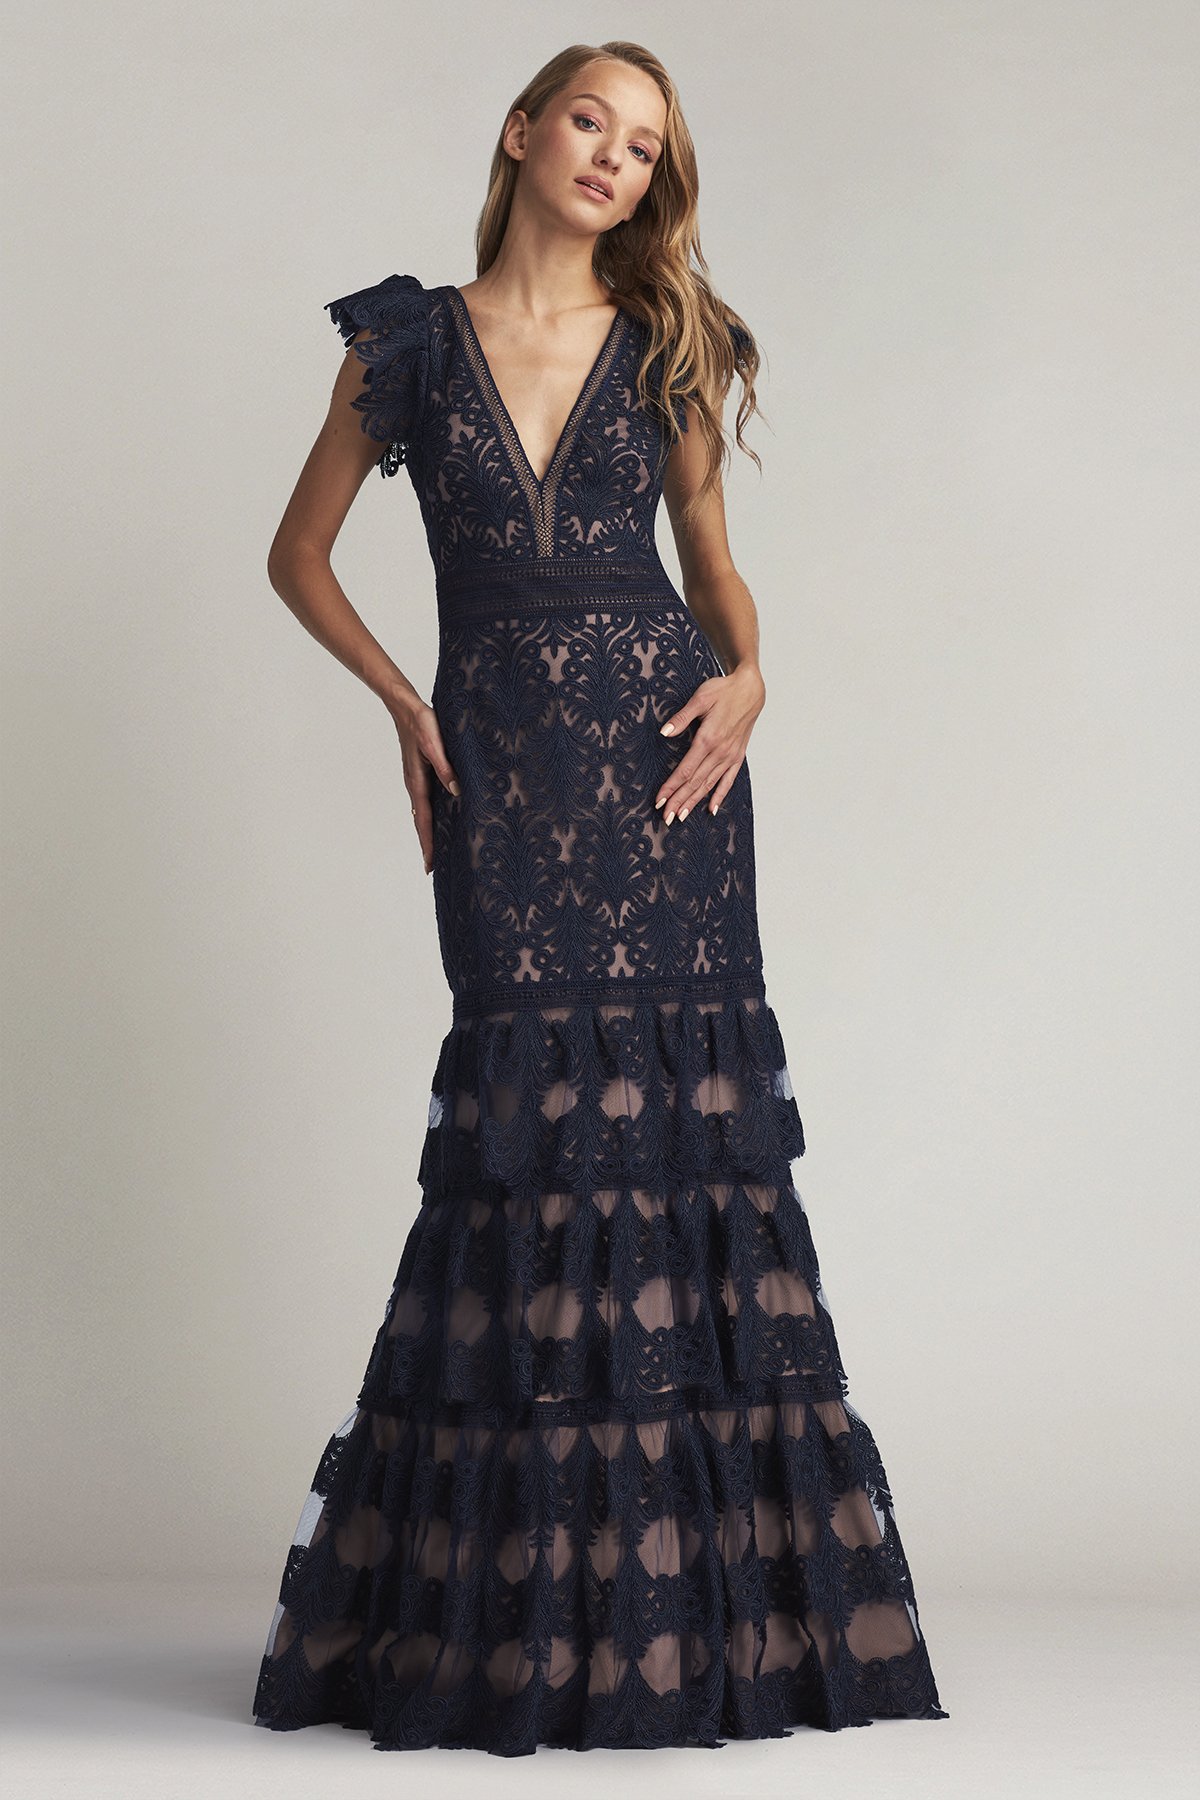 Rhone Tiered Embroidered Tulle Gown